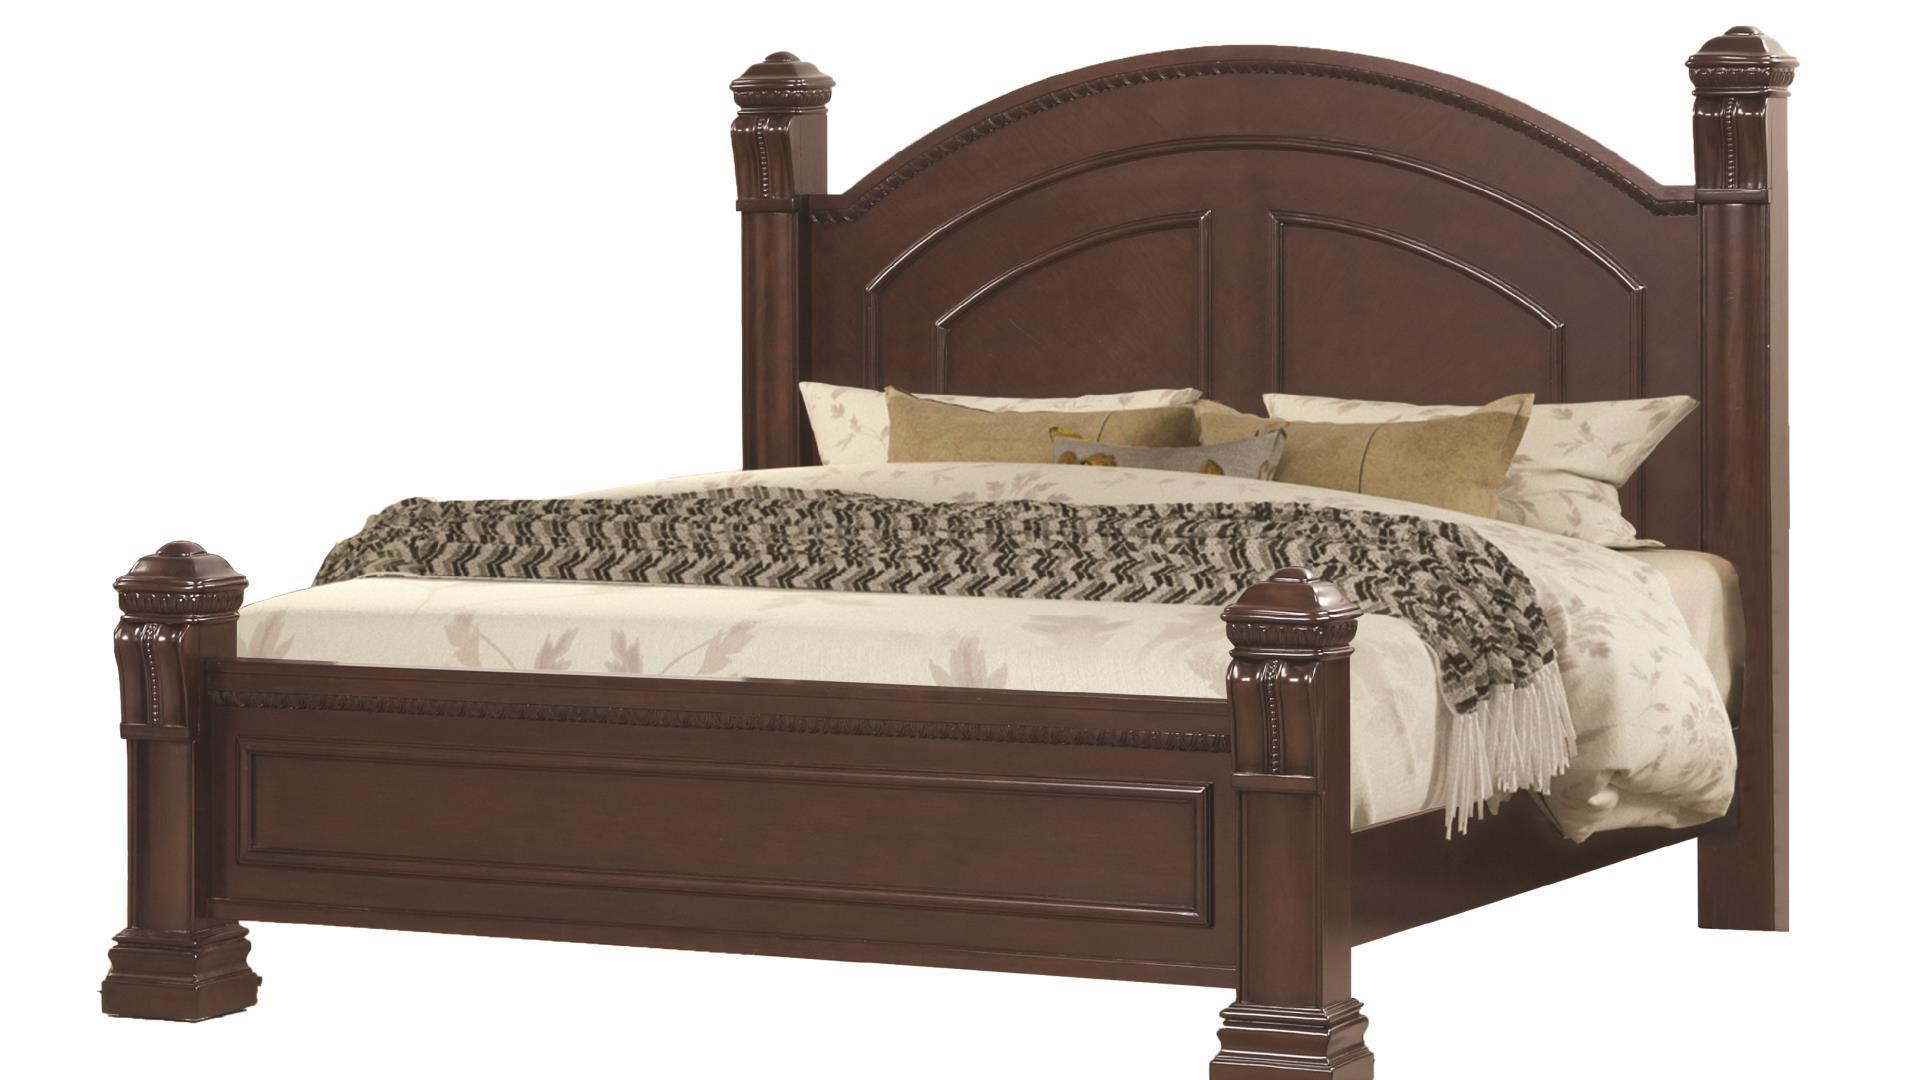 

    
Cherry Solid Wood King Bedroom Set 5Pcs Aspen Galaxy Home Traditional Classic
